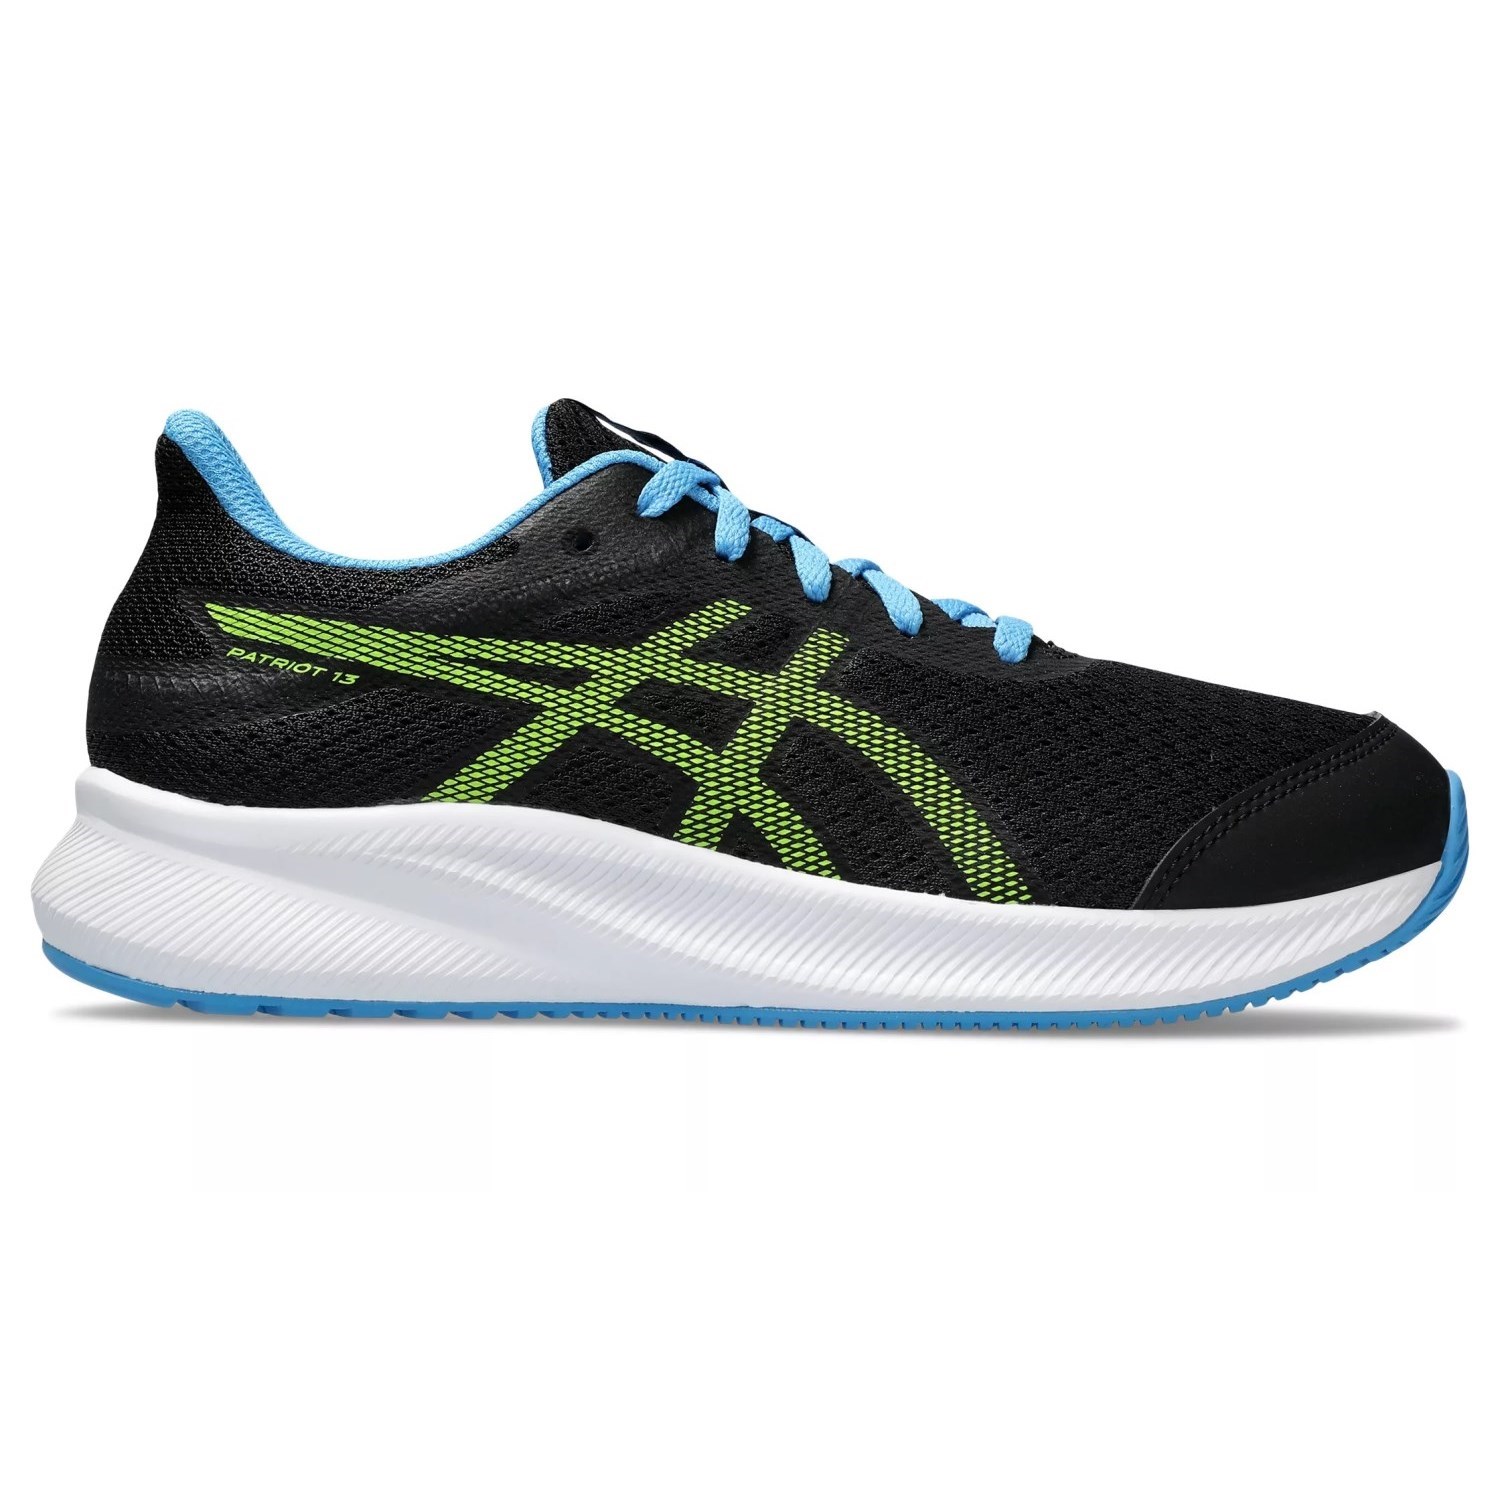 Asics Patriot 13 GS - Kids Running Shoes - Black/Electric Lime